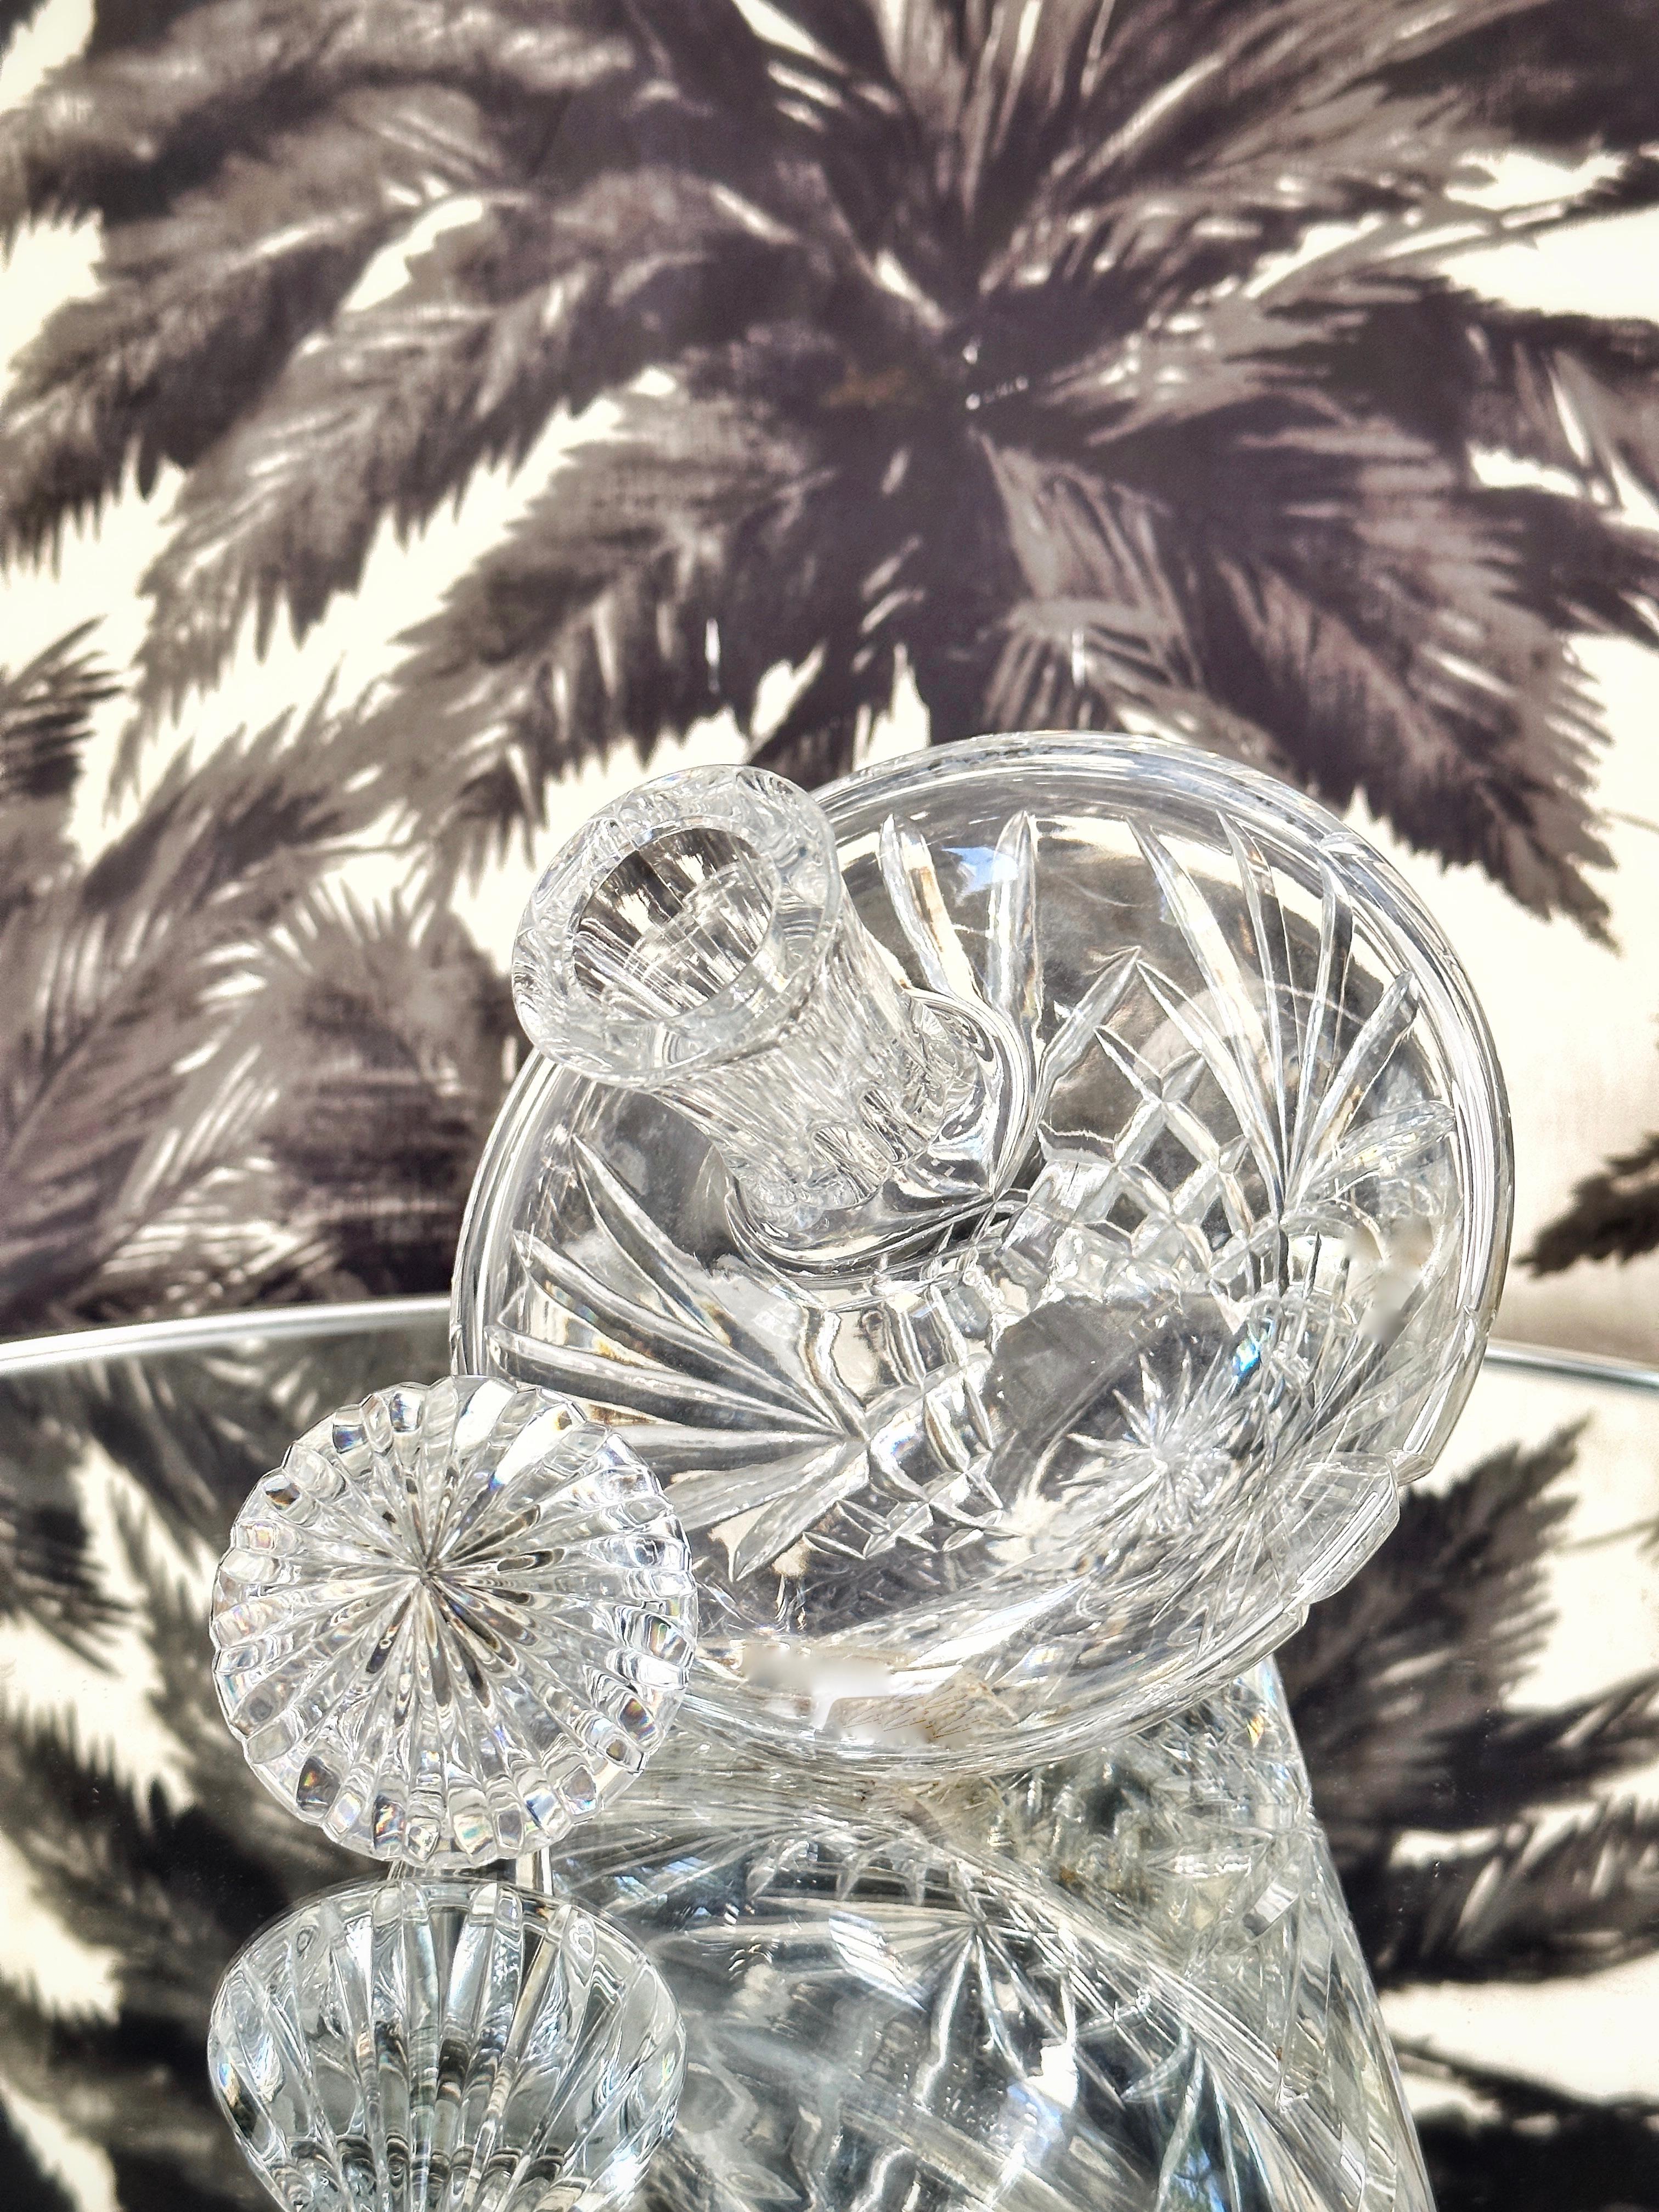 Late 20th Century Vintage Waterford Crystal Leaning Decanter with Etched Designs, circa 1980